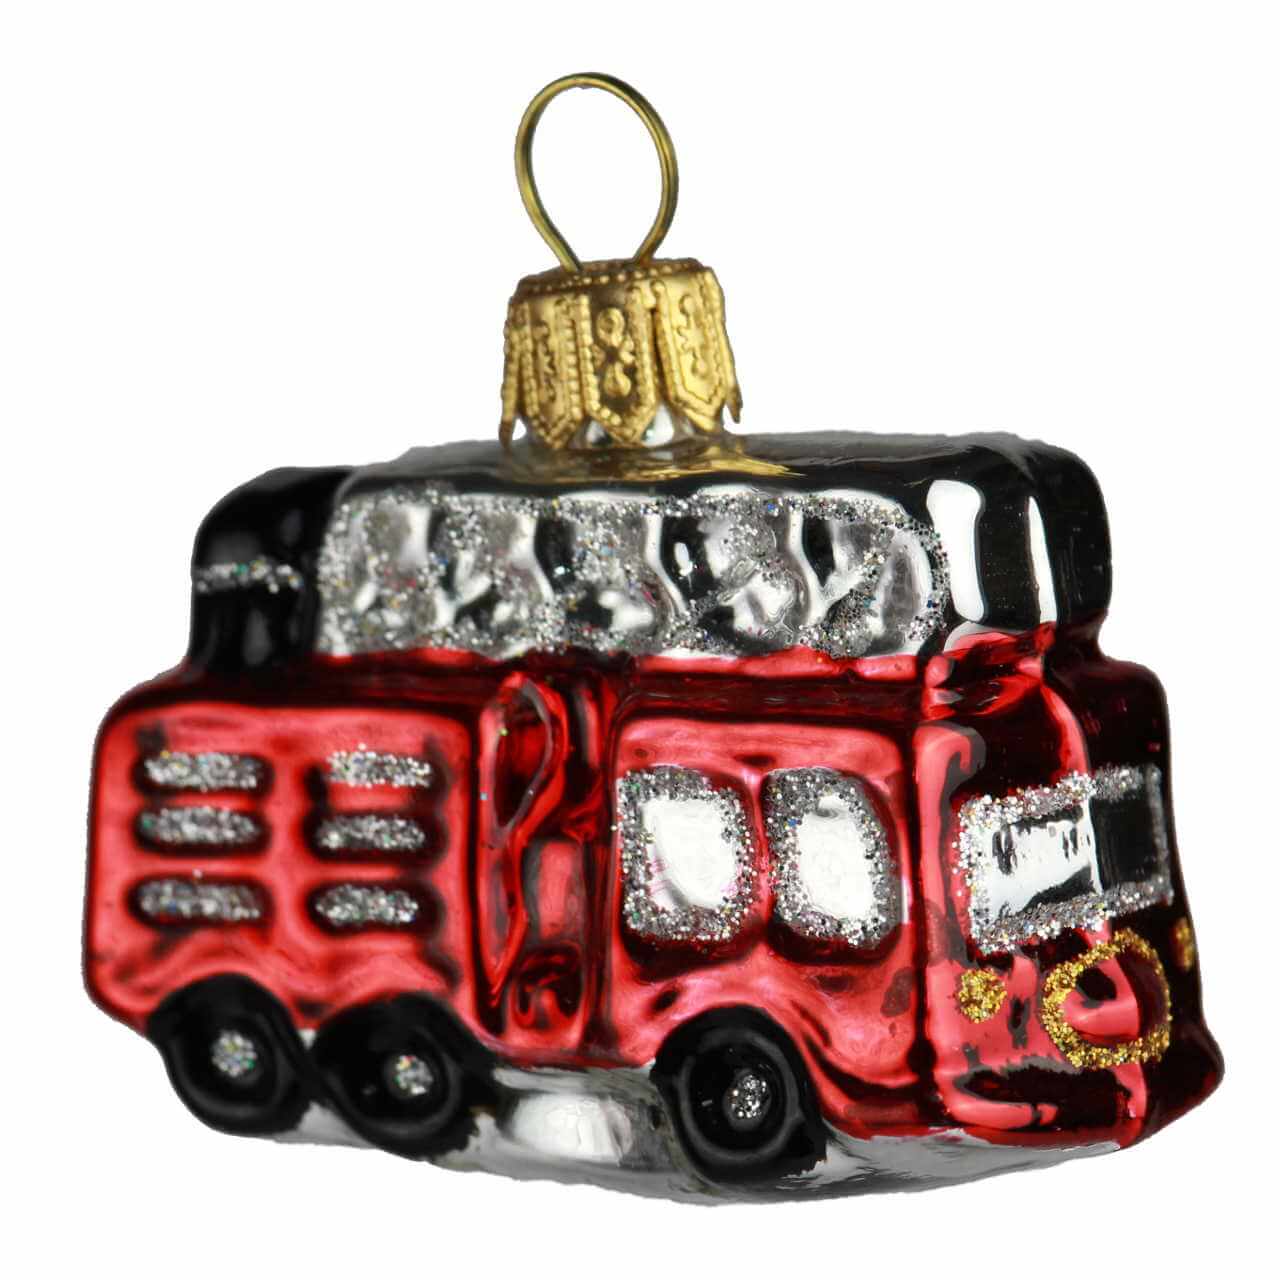 Small fire engine